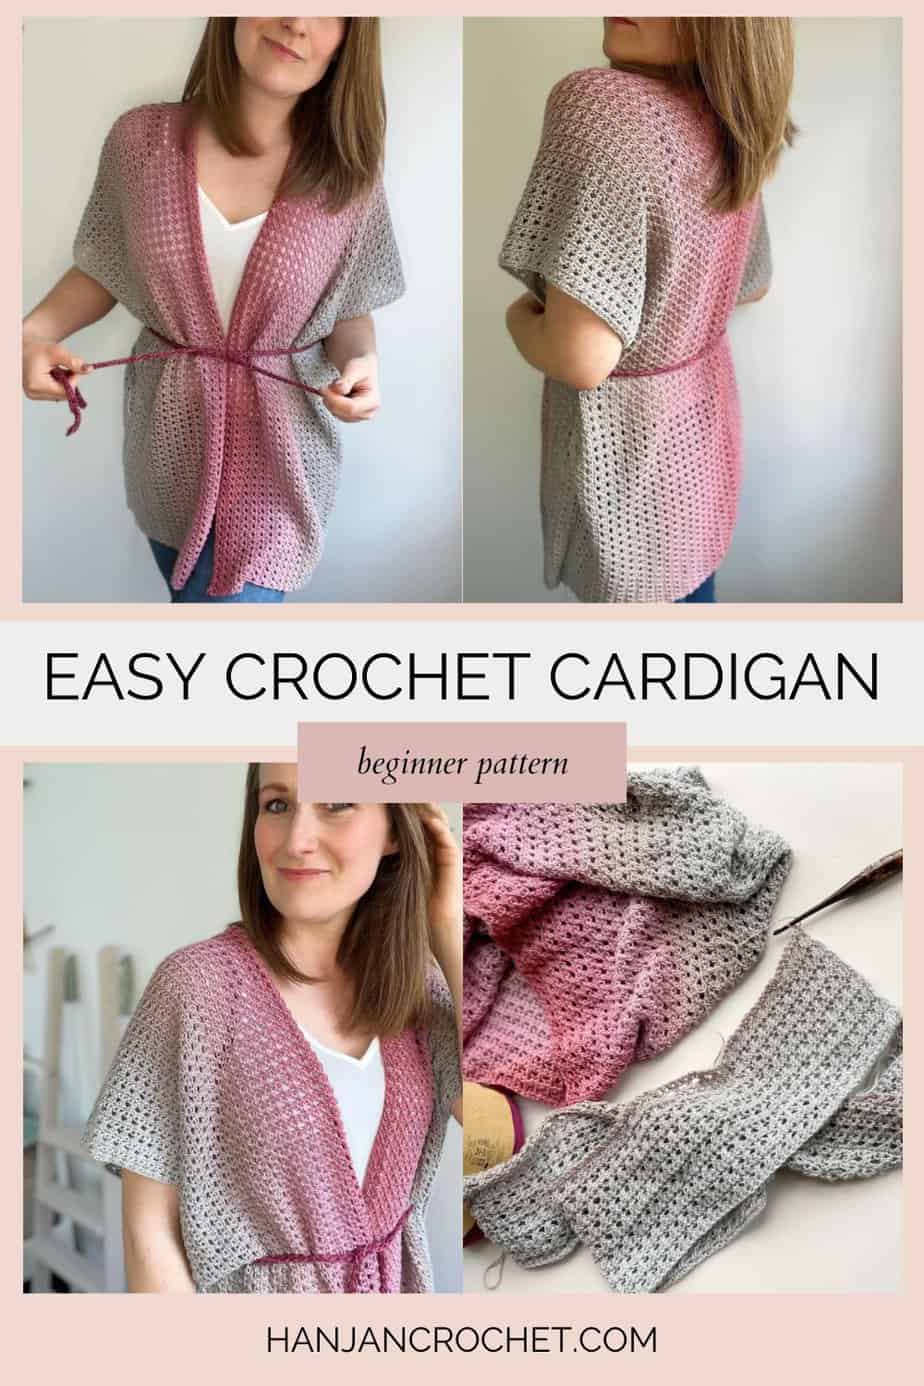 Images of easy summer crochet cardigan pattern in pink and grey ombre yarn.